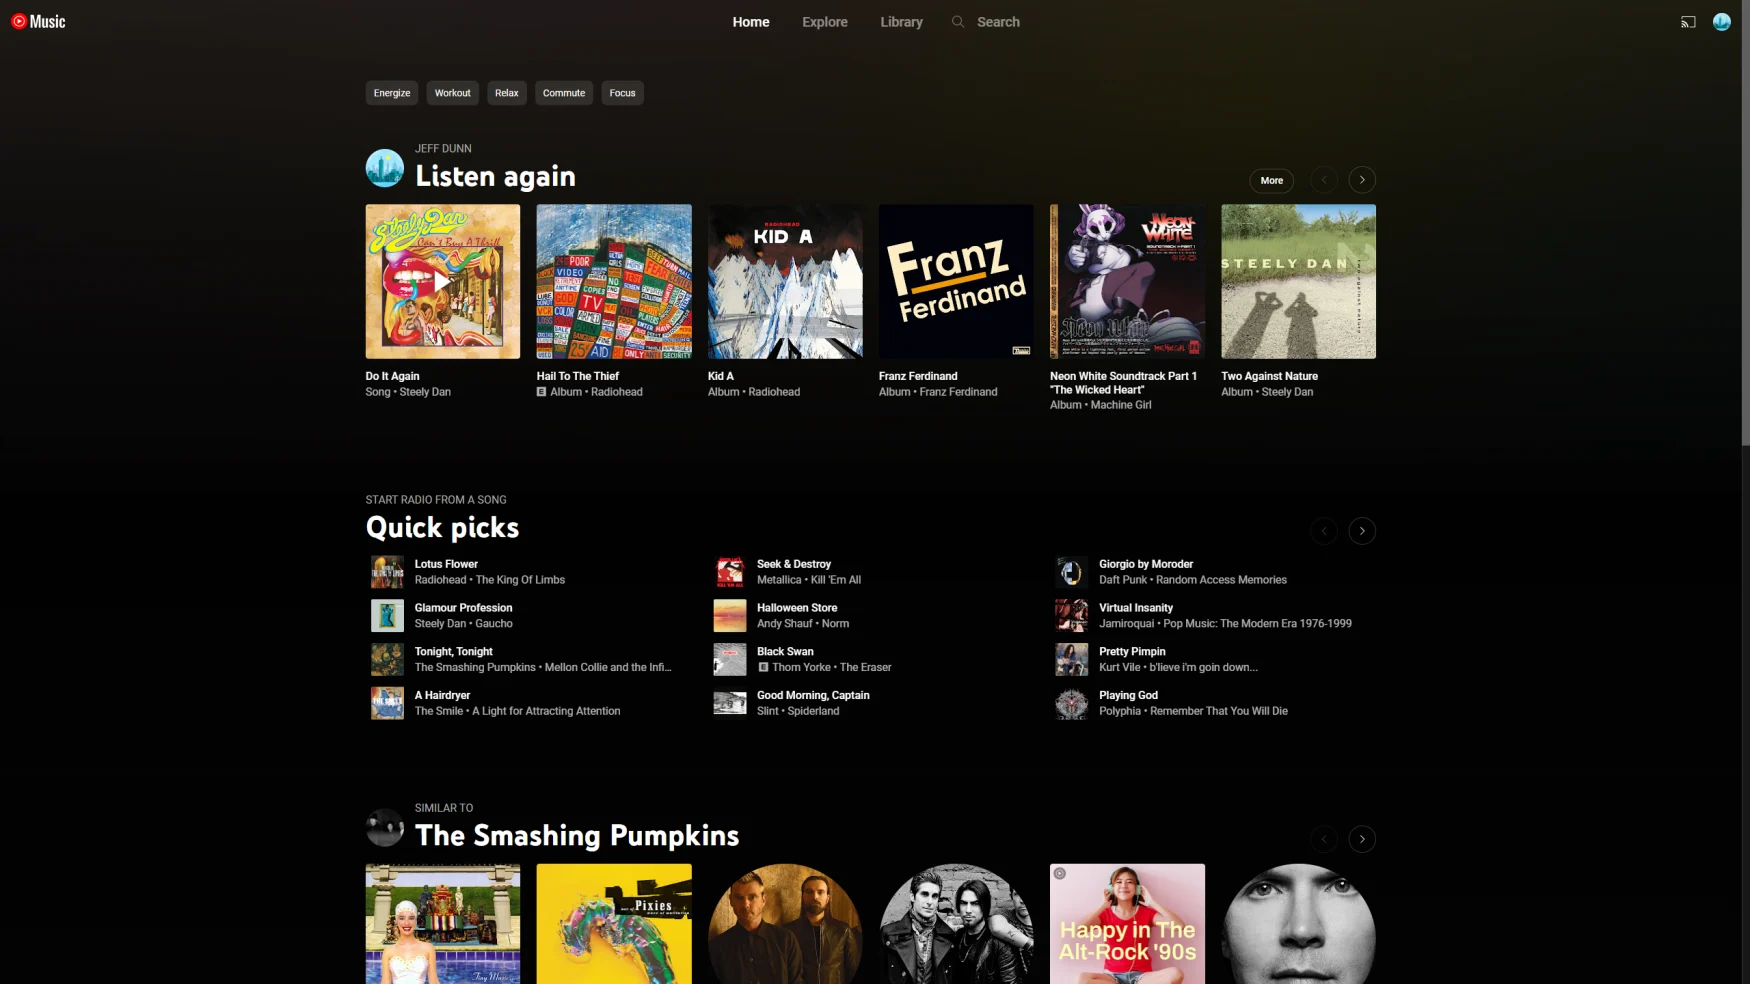 A screenshot of the YouTube Music app on web browsers.